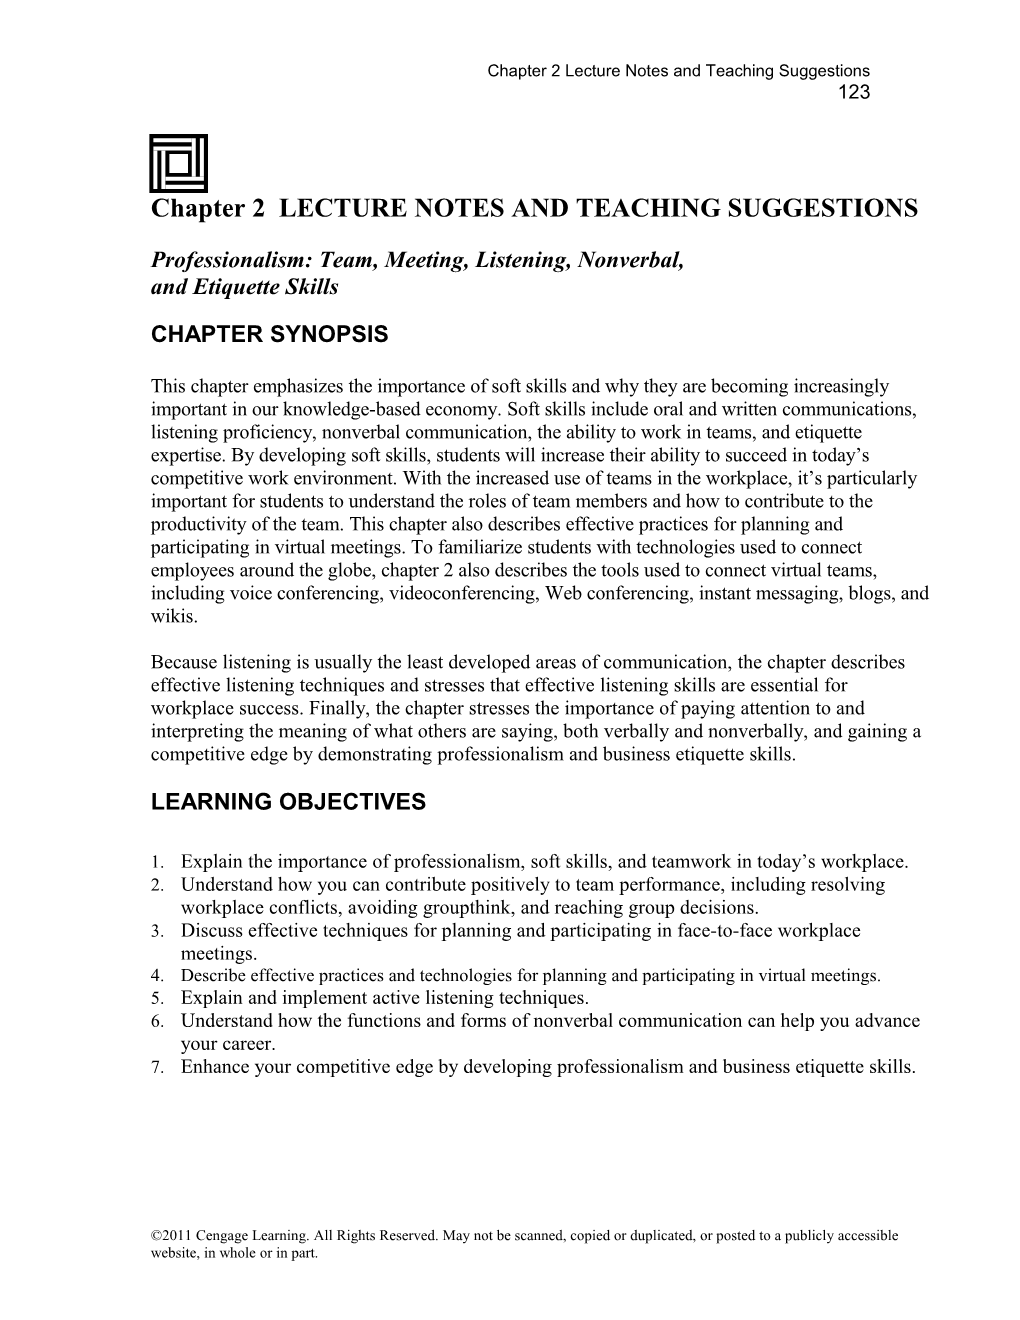 Chapter 2 LECTURE NOTES and TEACHING SUGGESTIONS